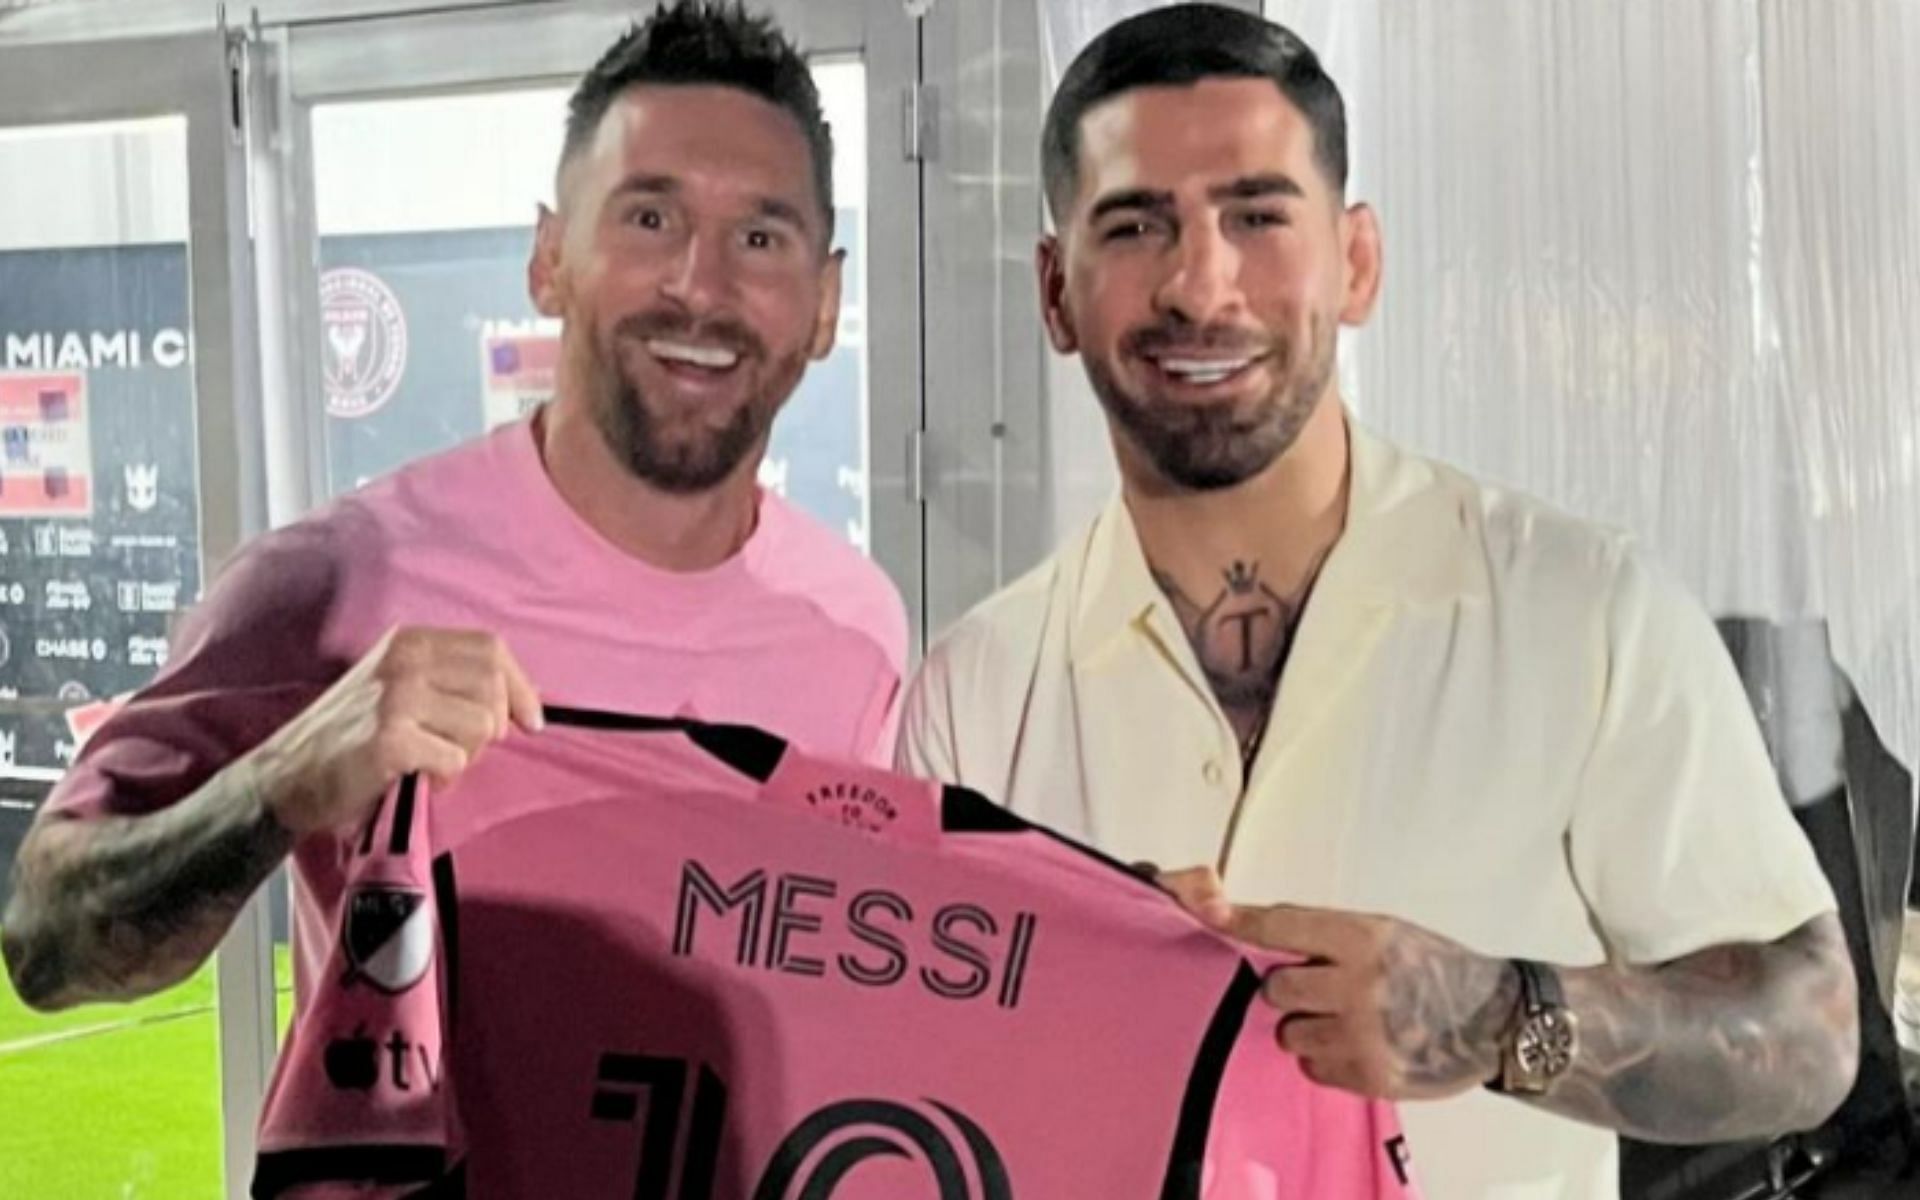 Ilia Topuria (right) names Lionel Messi (left) and NBA legend as two stars would ask for photos with [Image courtesy of @iliatopuria on Instagram]